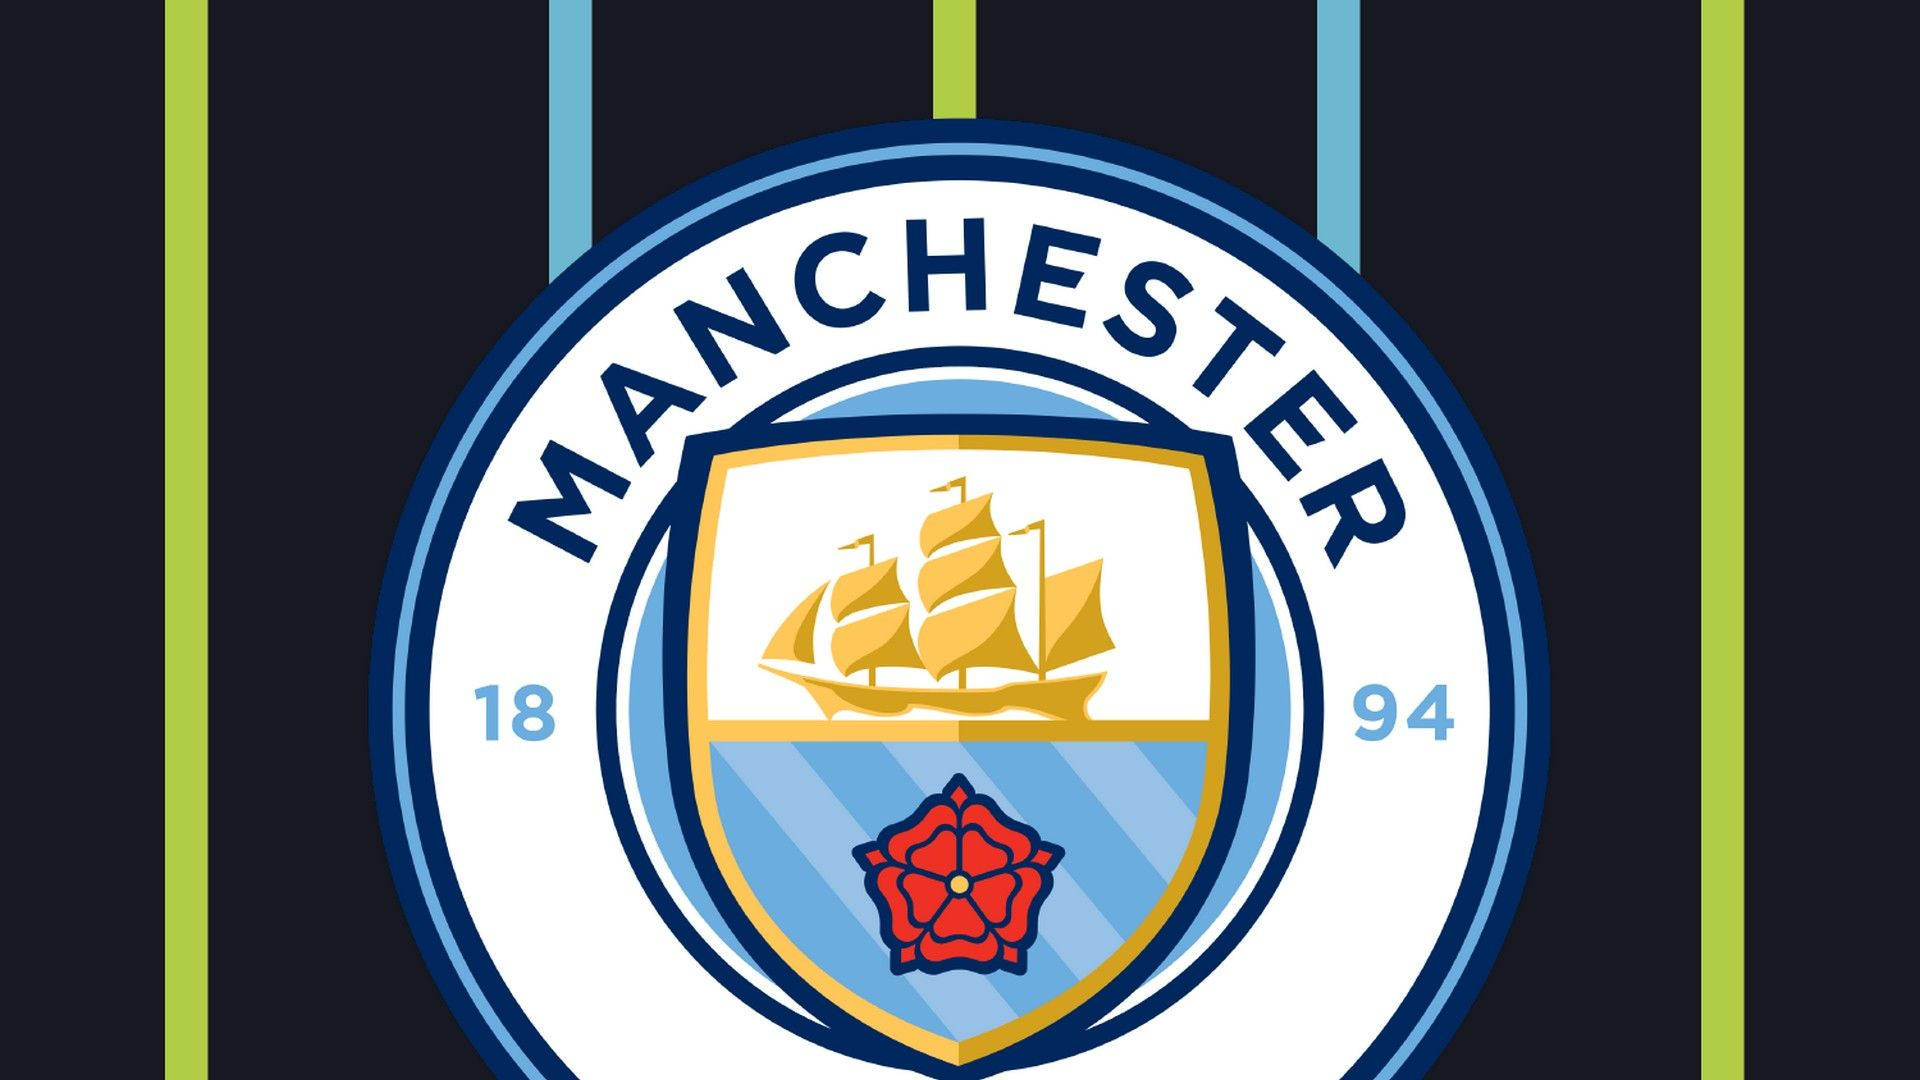 Show Your Support With The Iconic Manchester City Logo! Background